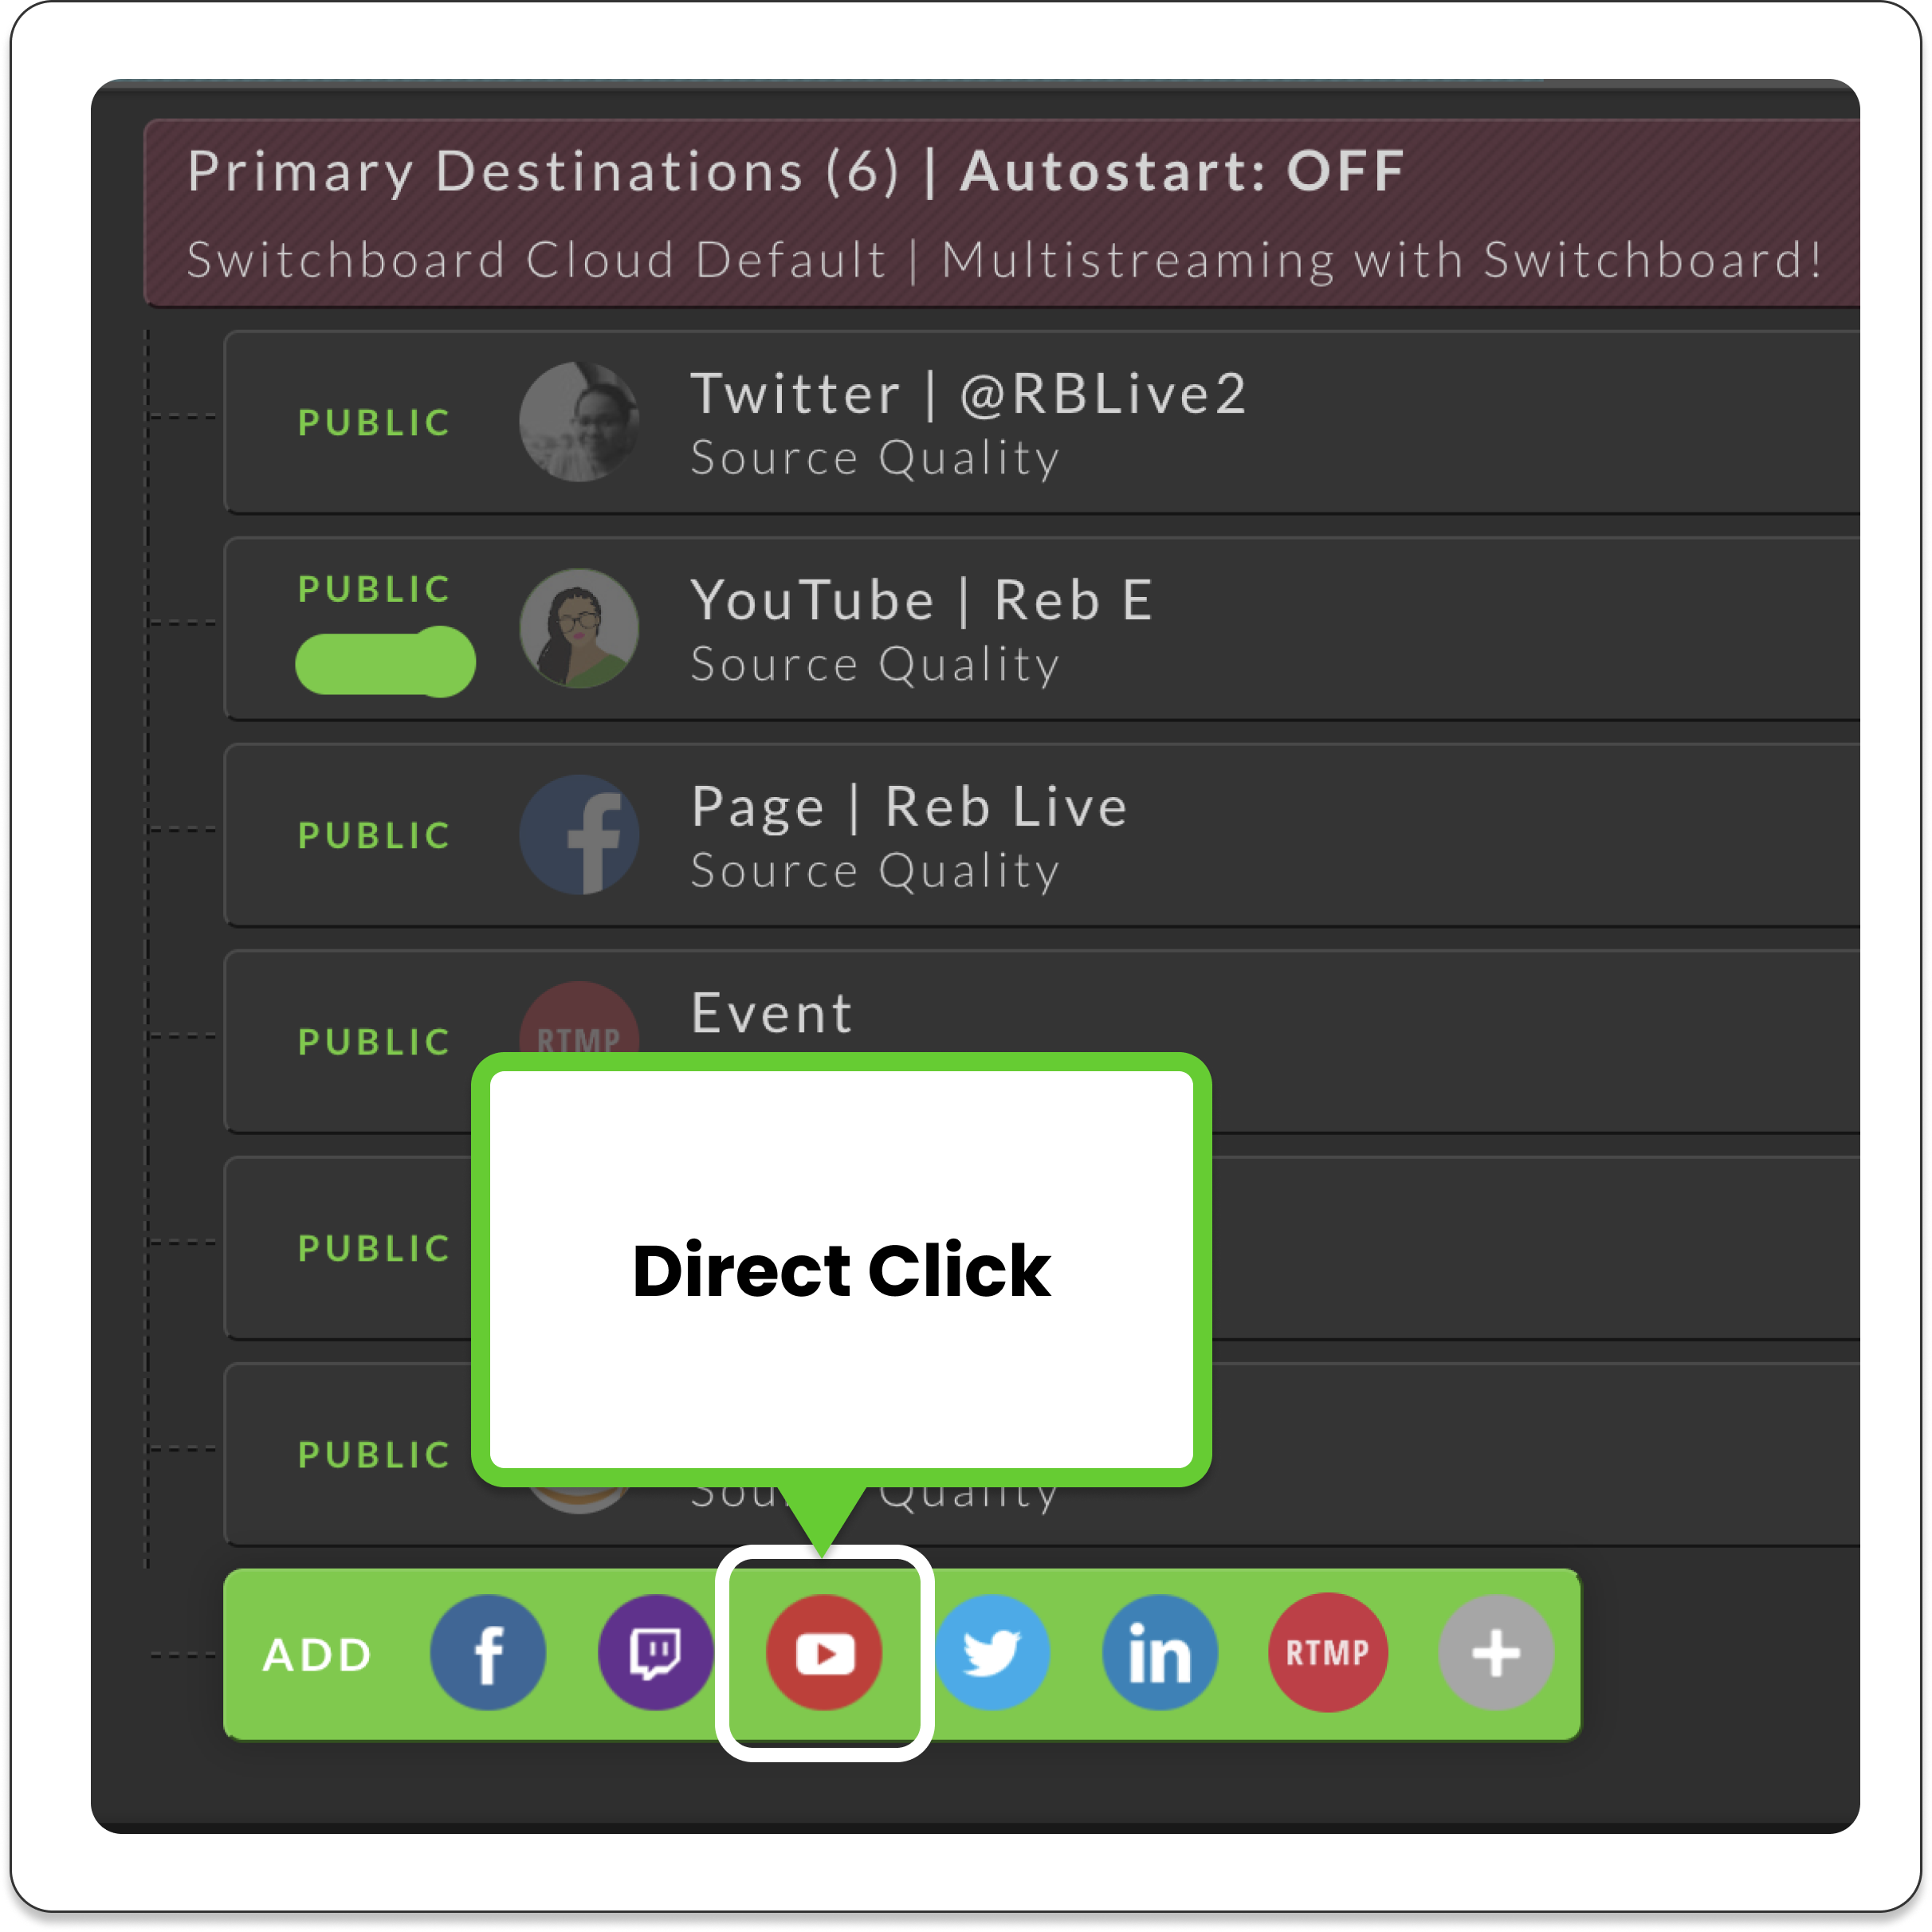 switchboardlive_workflow-page_destinations_pane_direct_click.png